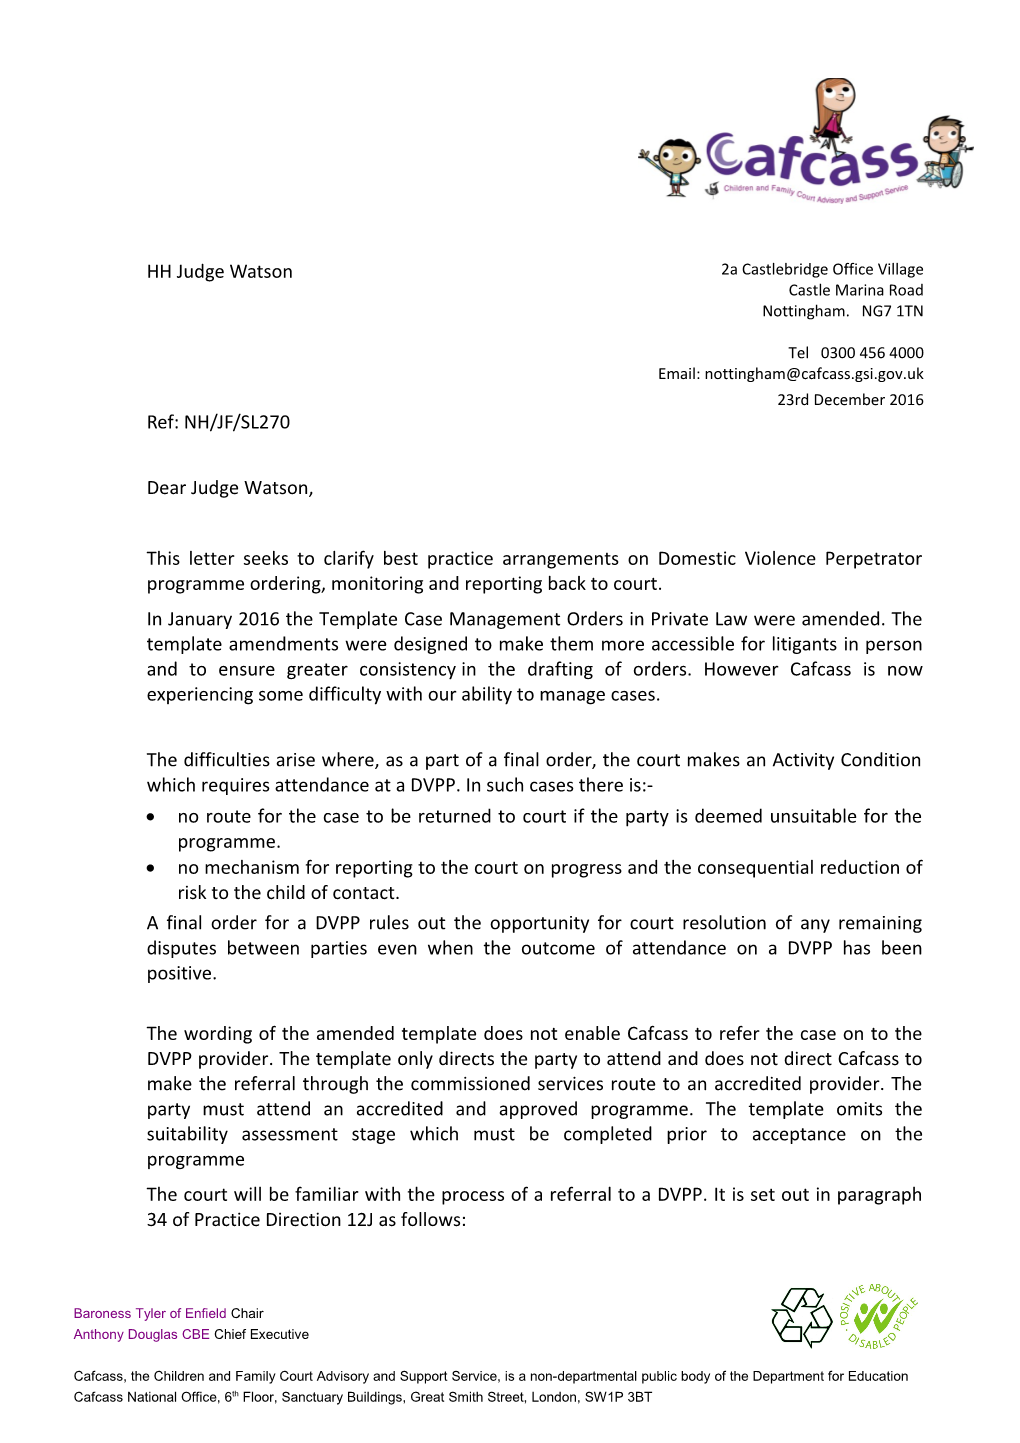 This Letter Seeks to Clarify Best Practice Arrangements on Domestic Violence Perpetrator